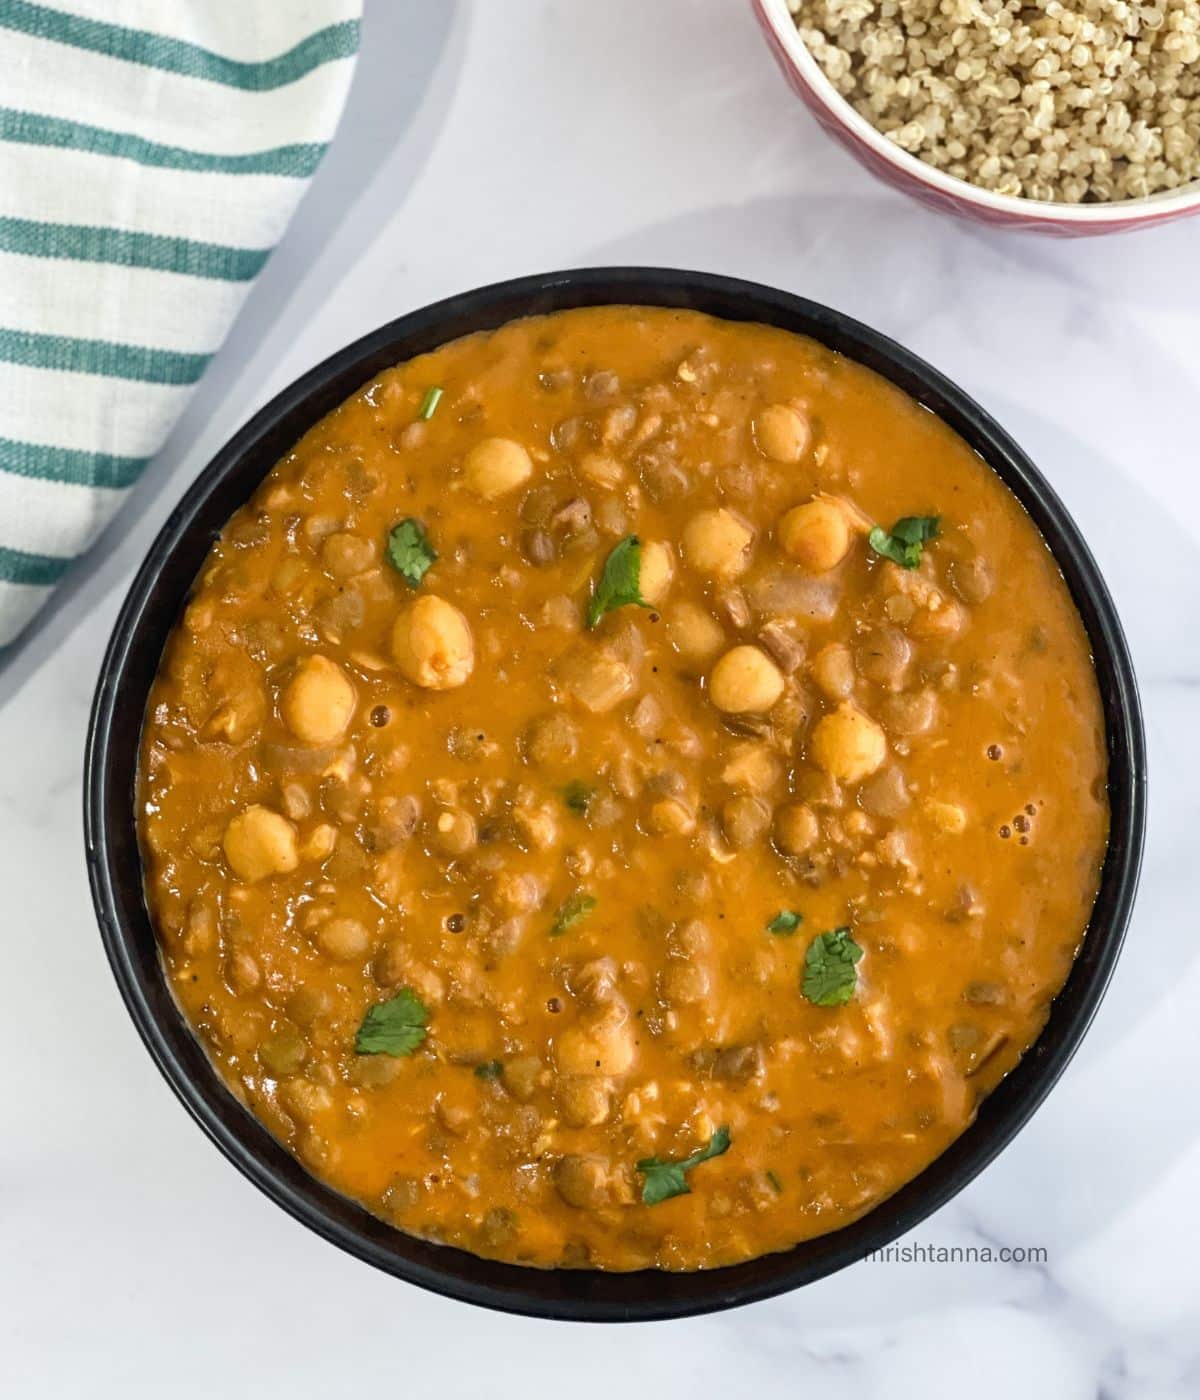 A bowl of chickpea and lentil curry is on the white surface.